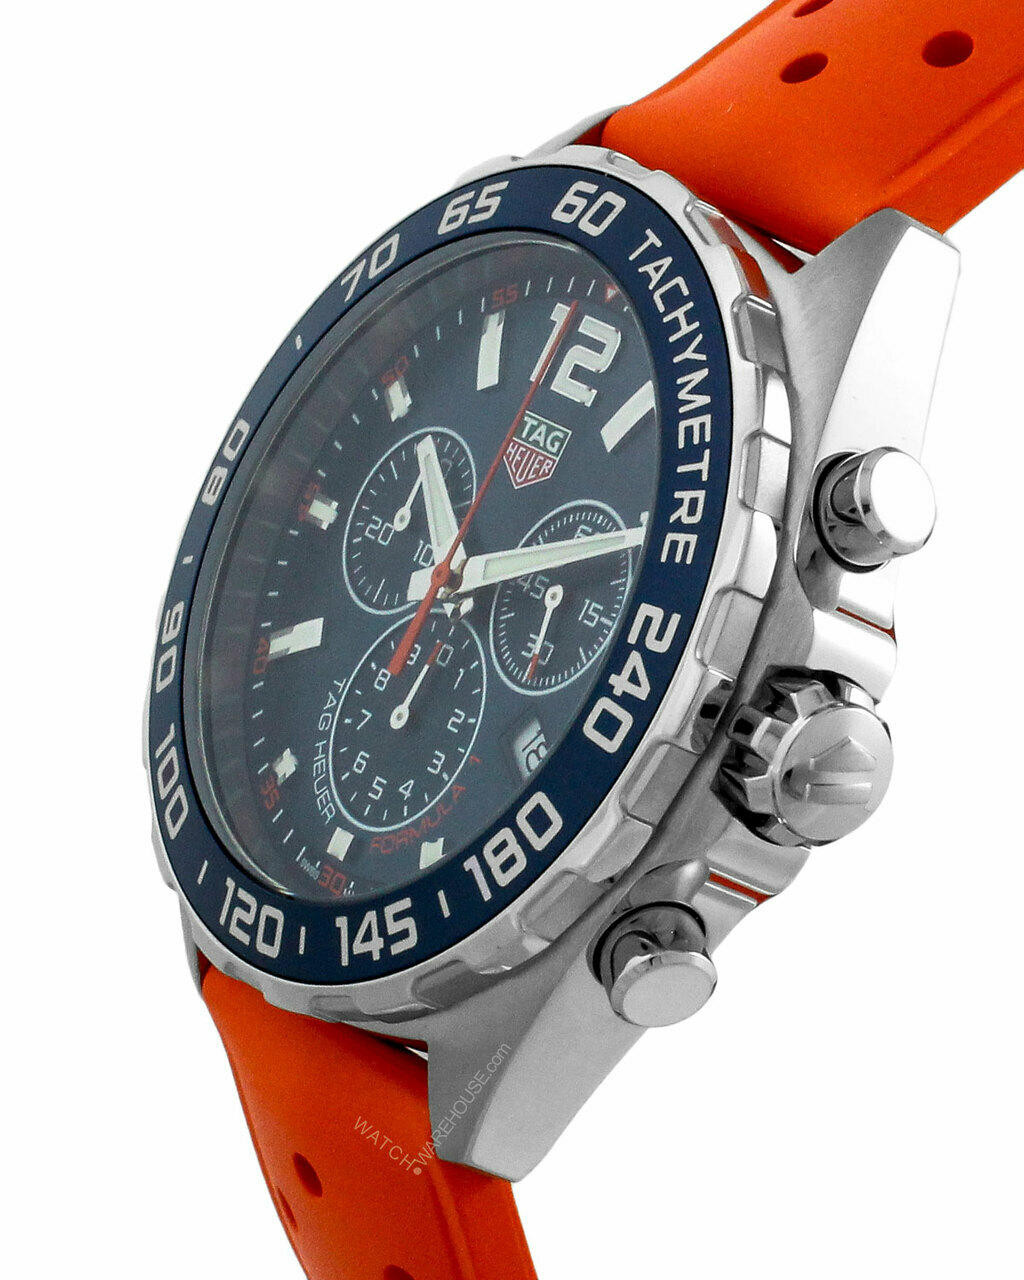 Tag Heuer Formula 1 Chronograph Blue Dial Orange Rubber Watch with 3 Subdials CAZ1014.FT8028